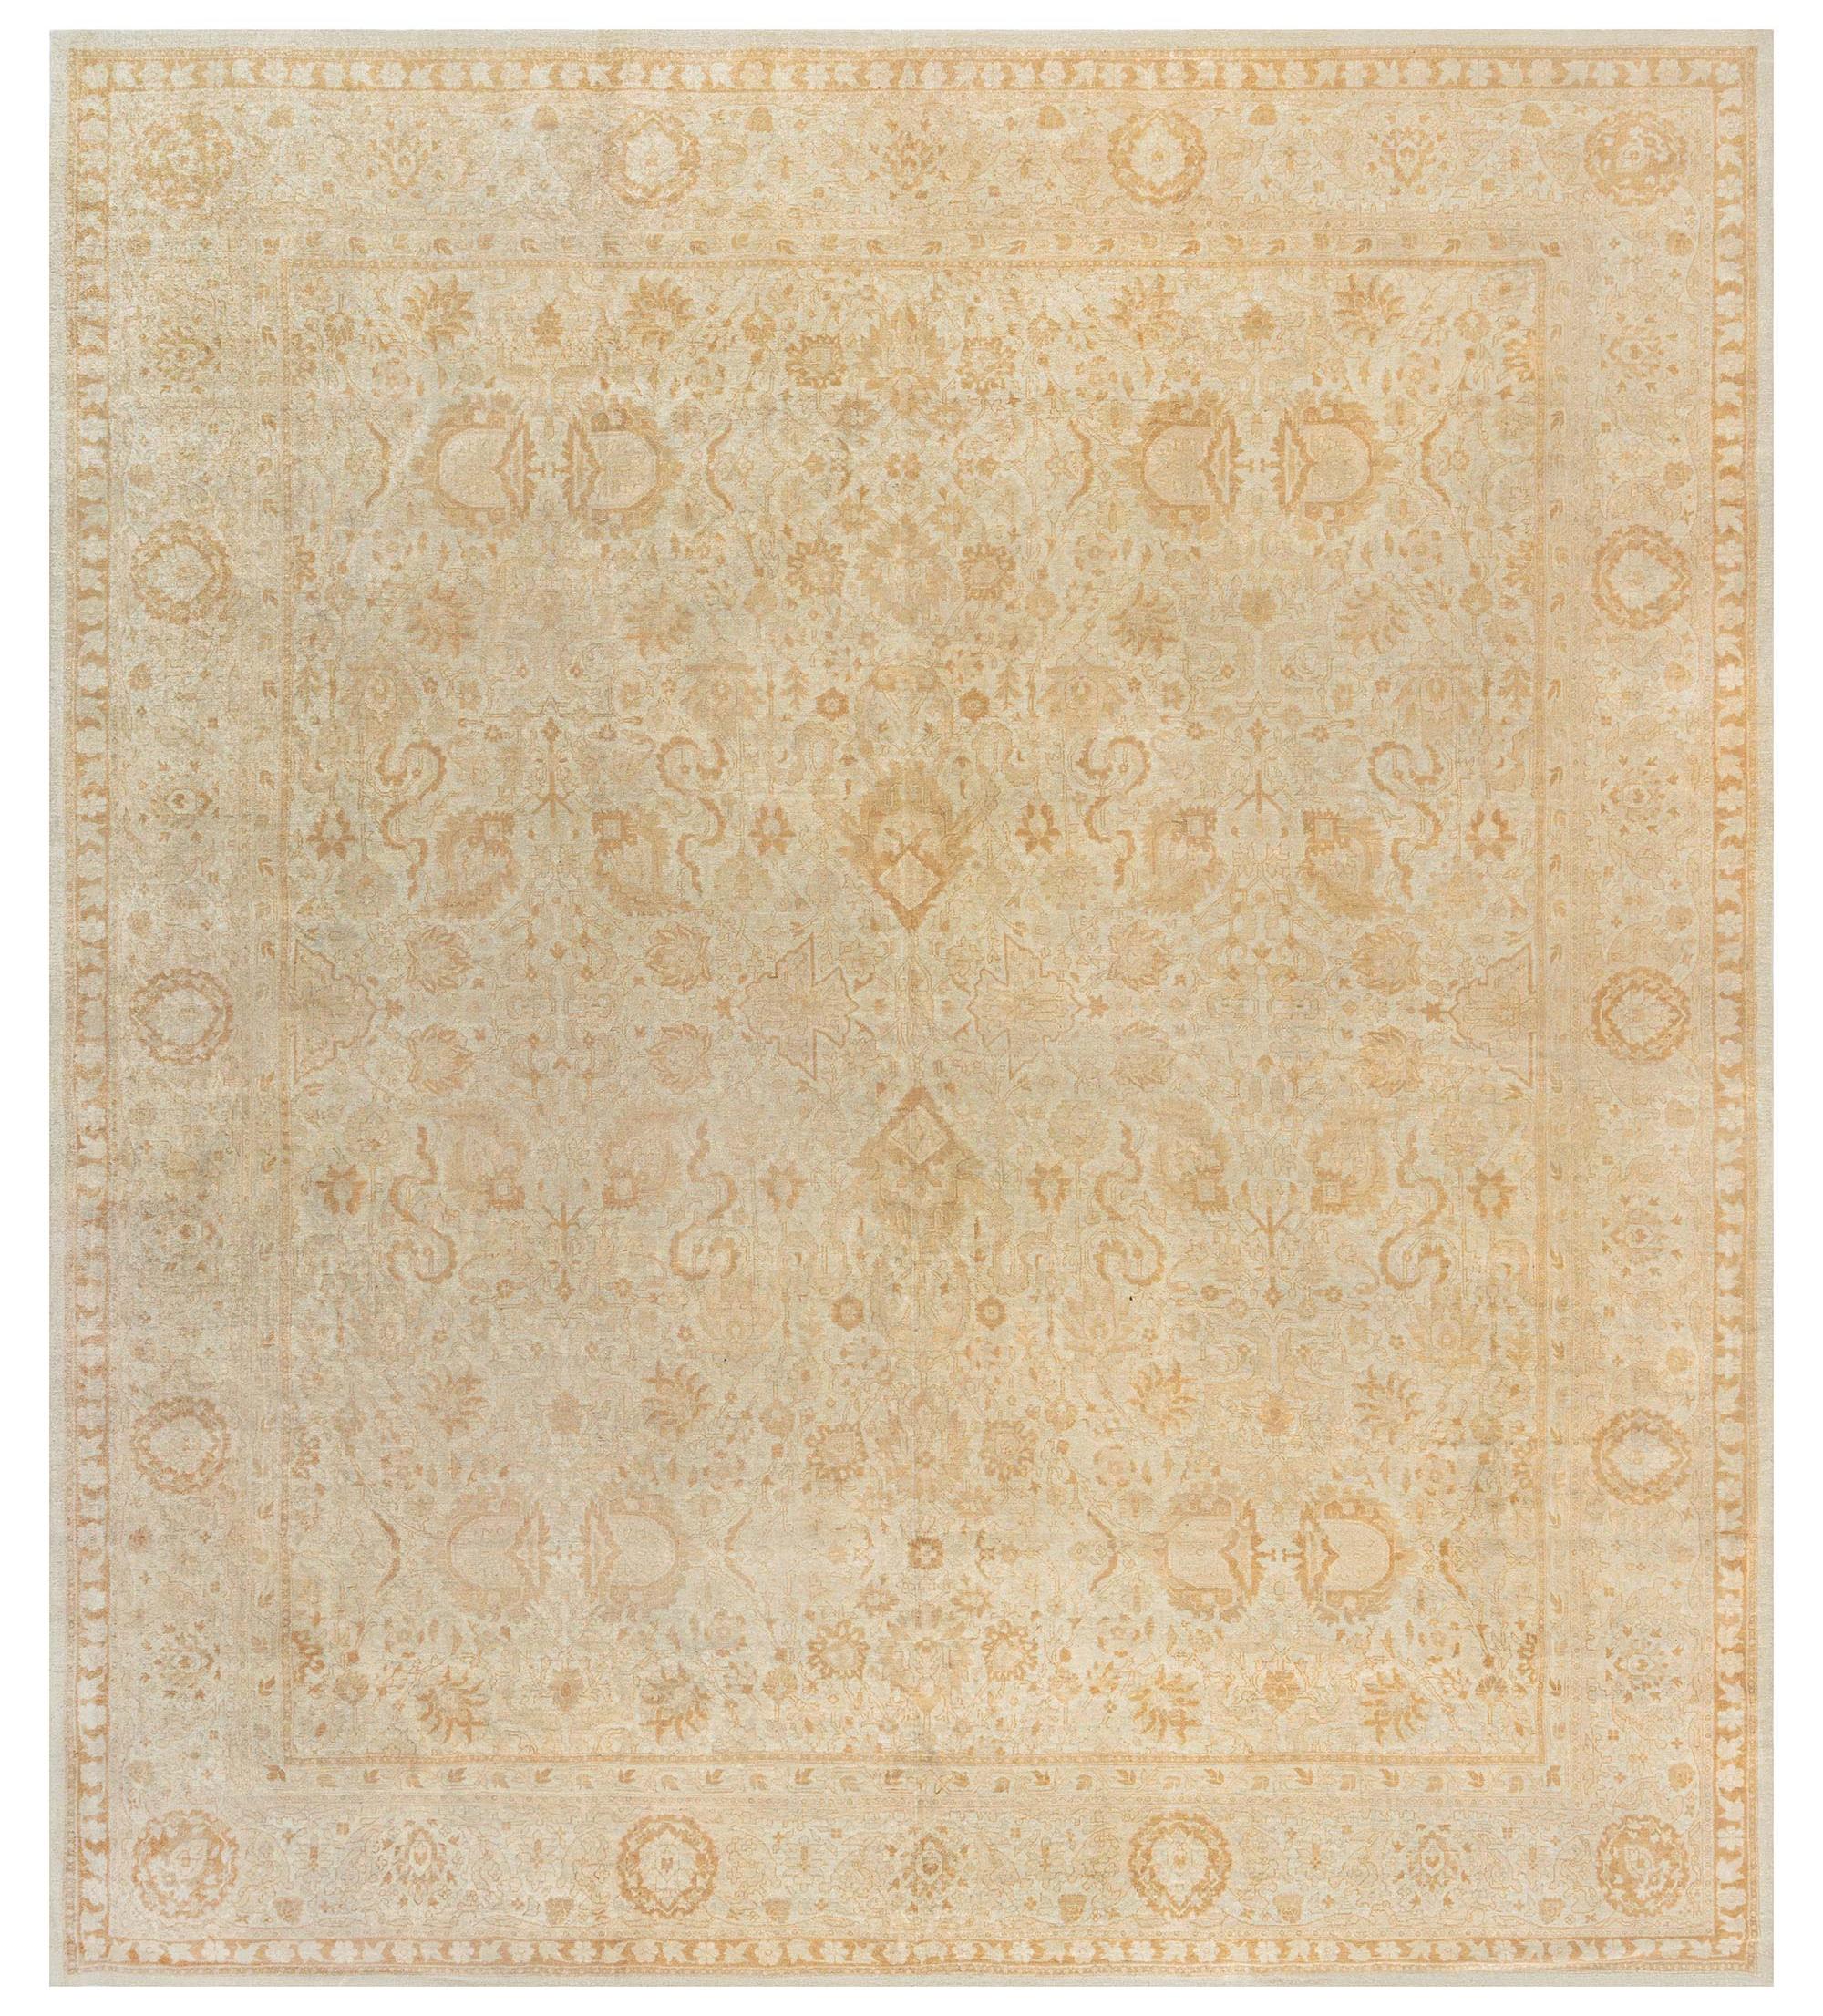 19th Century Indian Amritsar Handwoven Wool Rug For Sale